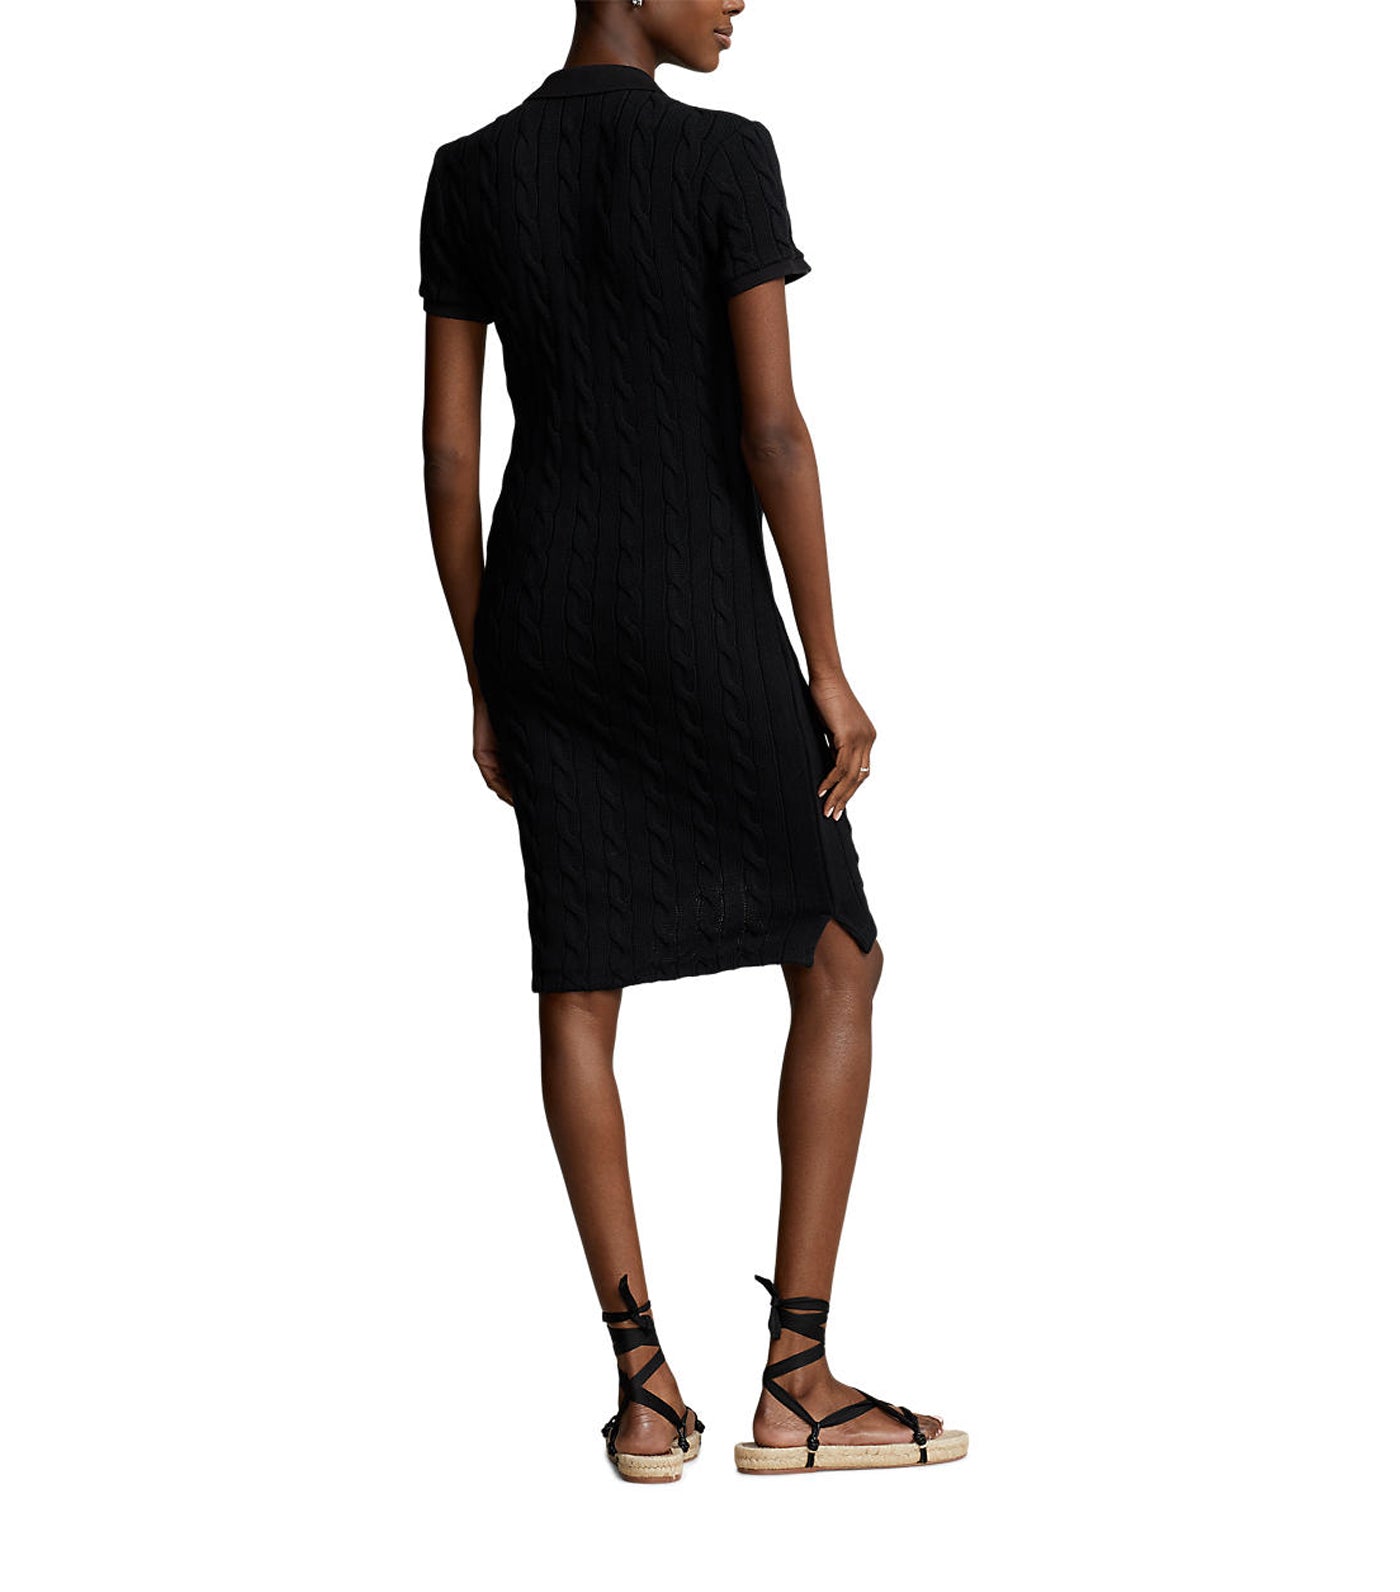 Women's Skinny Fit Cable Cotton Polo Dress Black